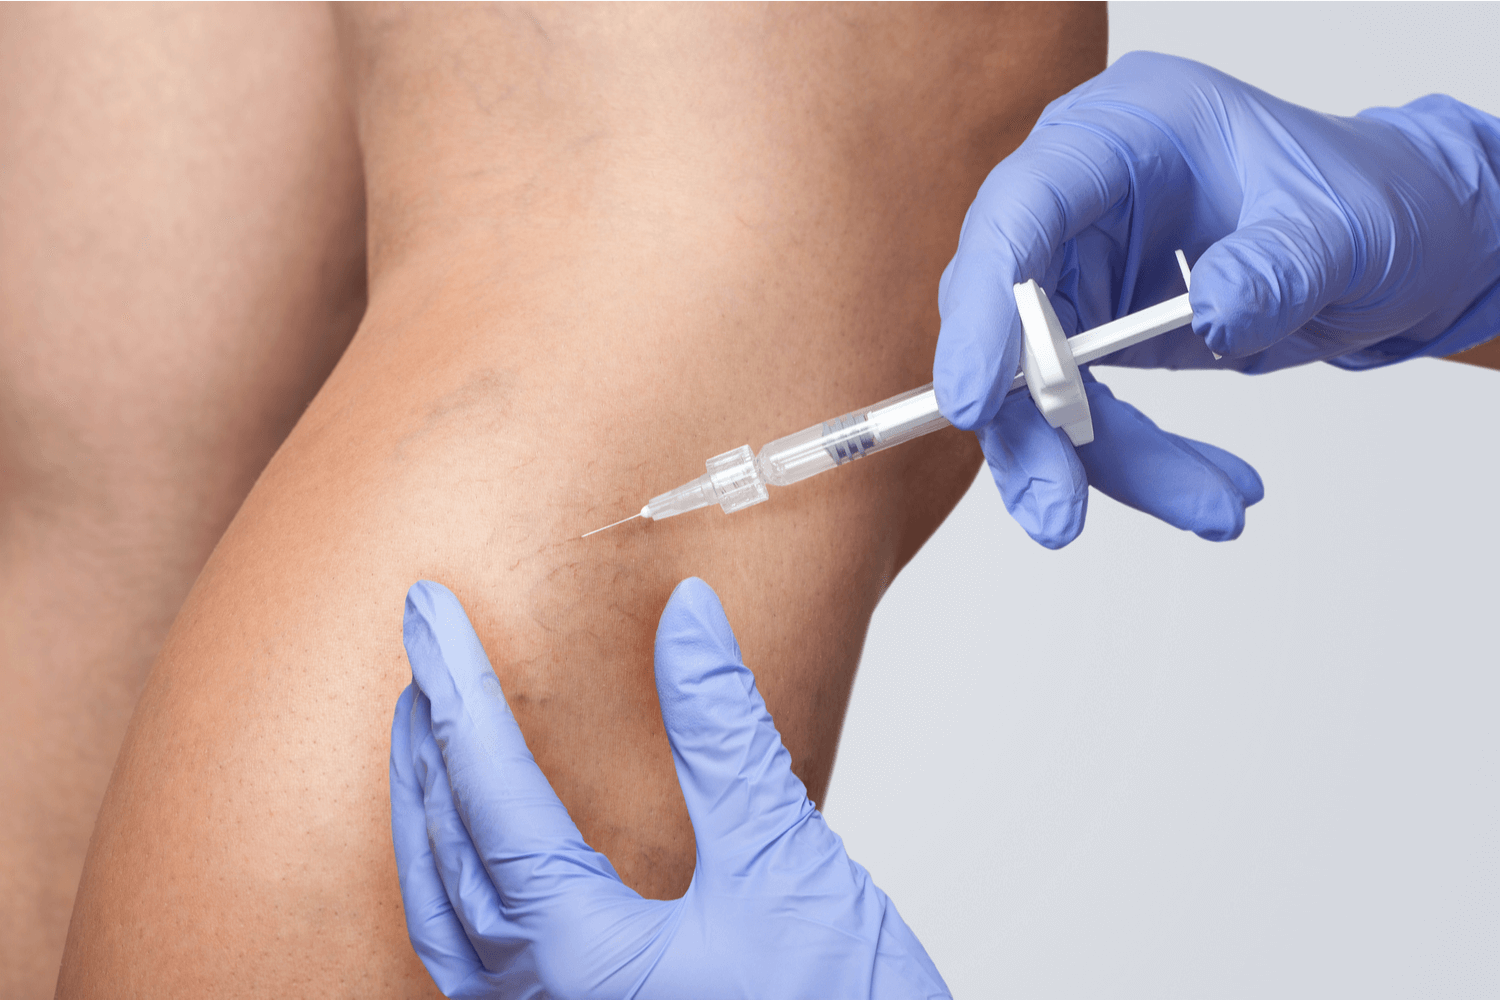 A doctor injecting sclerotherapy treatments for a spider vein patient